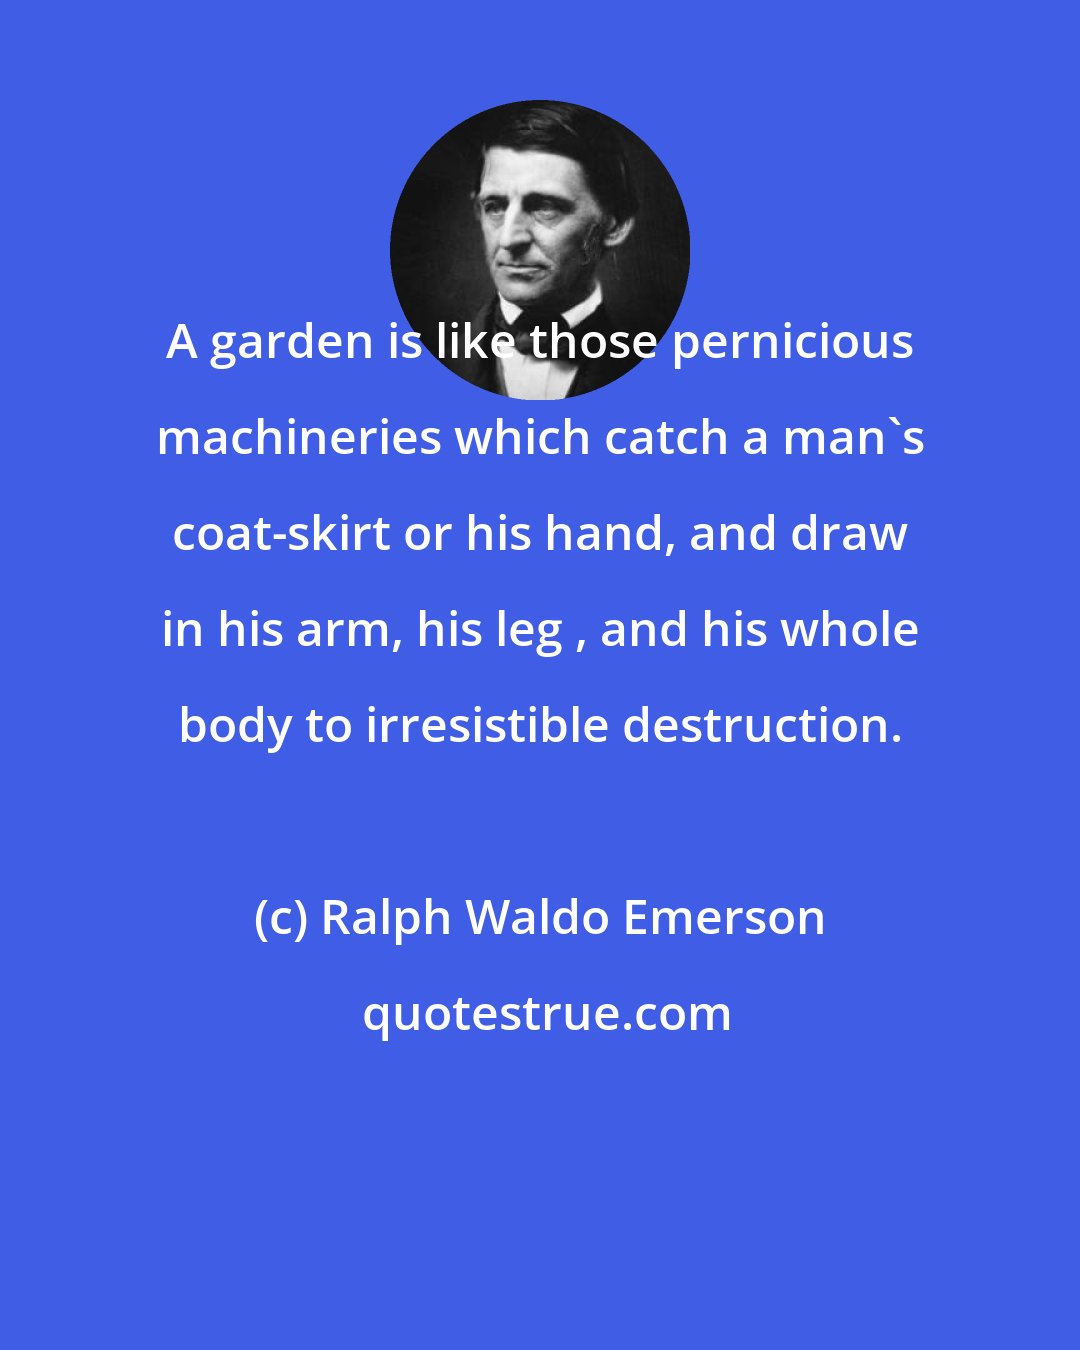 Ralph Waldo Emerson: A garden is like those pernicious machineries which catch a man's coat-skirt or his hand, and draw in his arm, his leg , and his whole body to irresistible destruction.